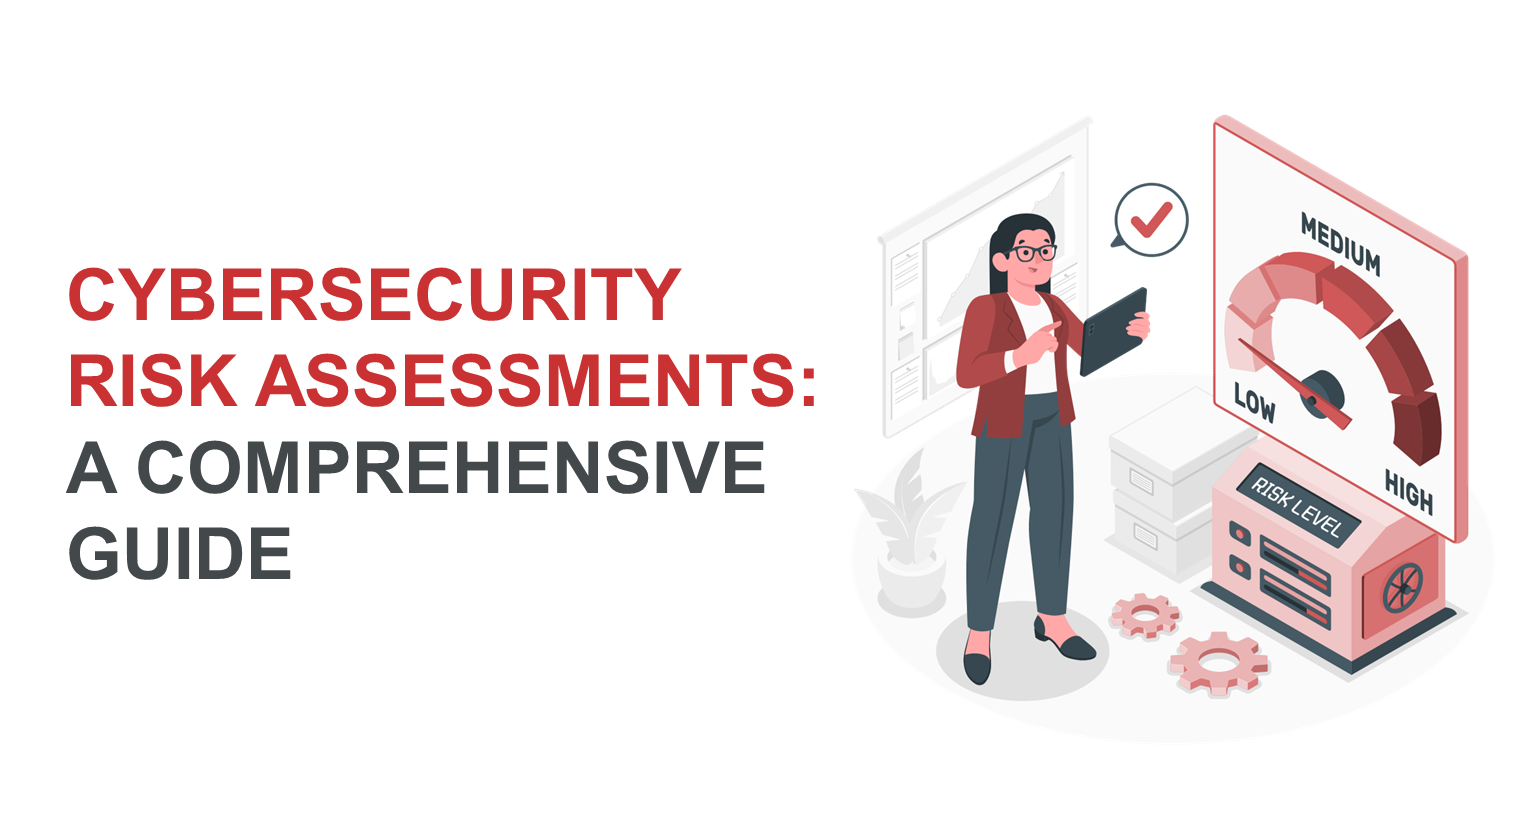 Cybersecurity Risk Assessments: A Comprehensive Guide 